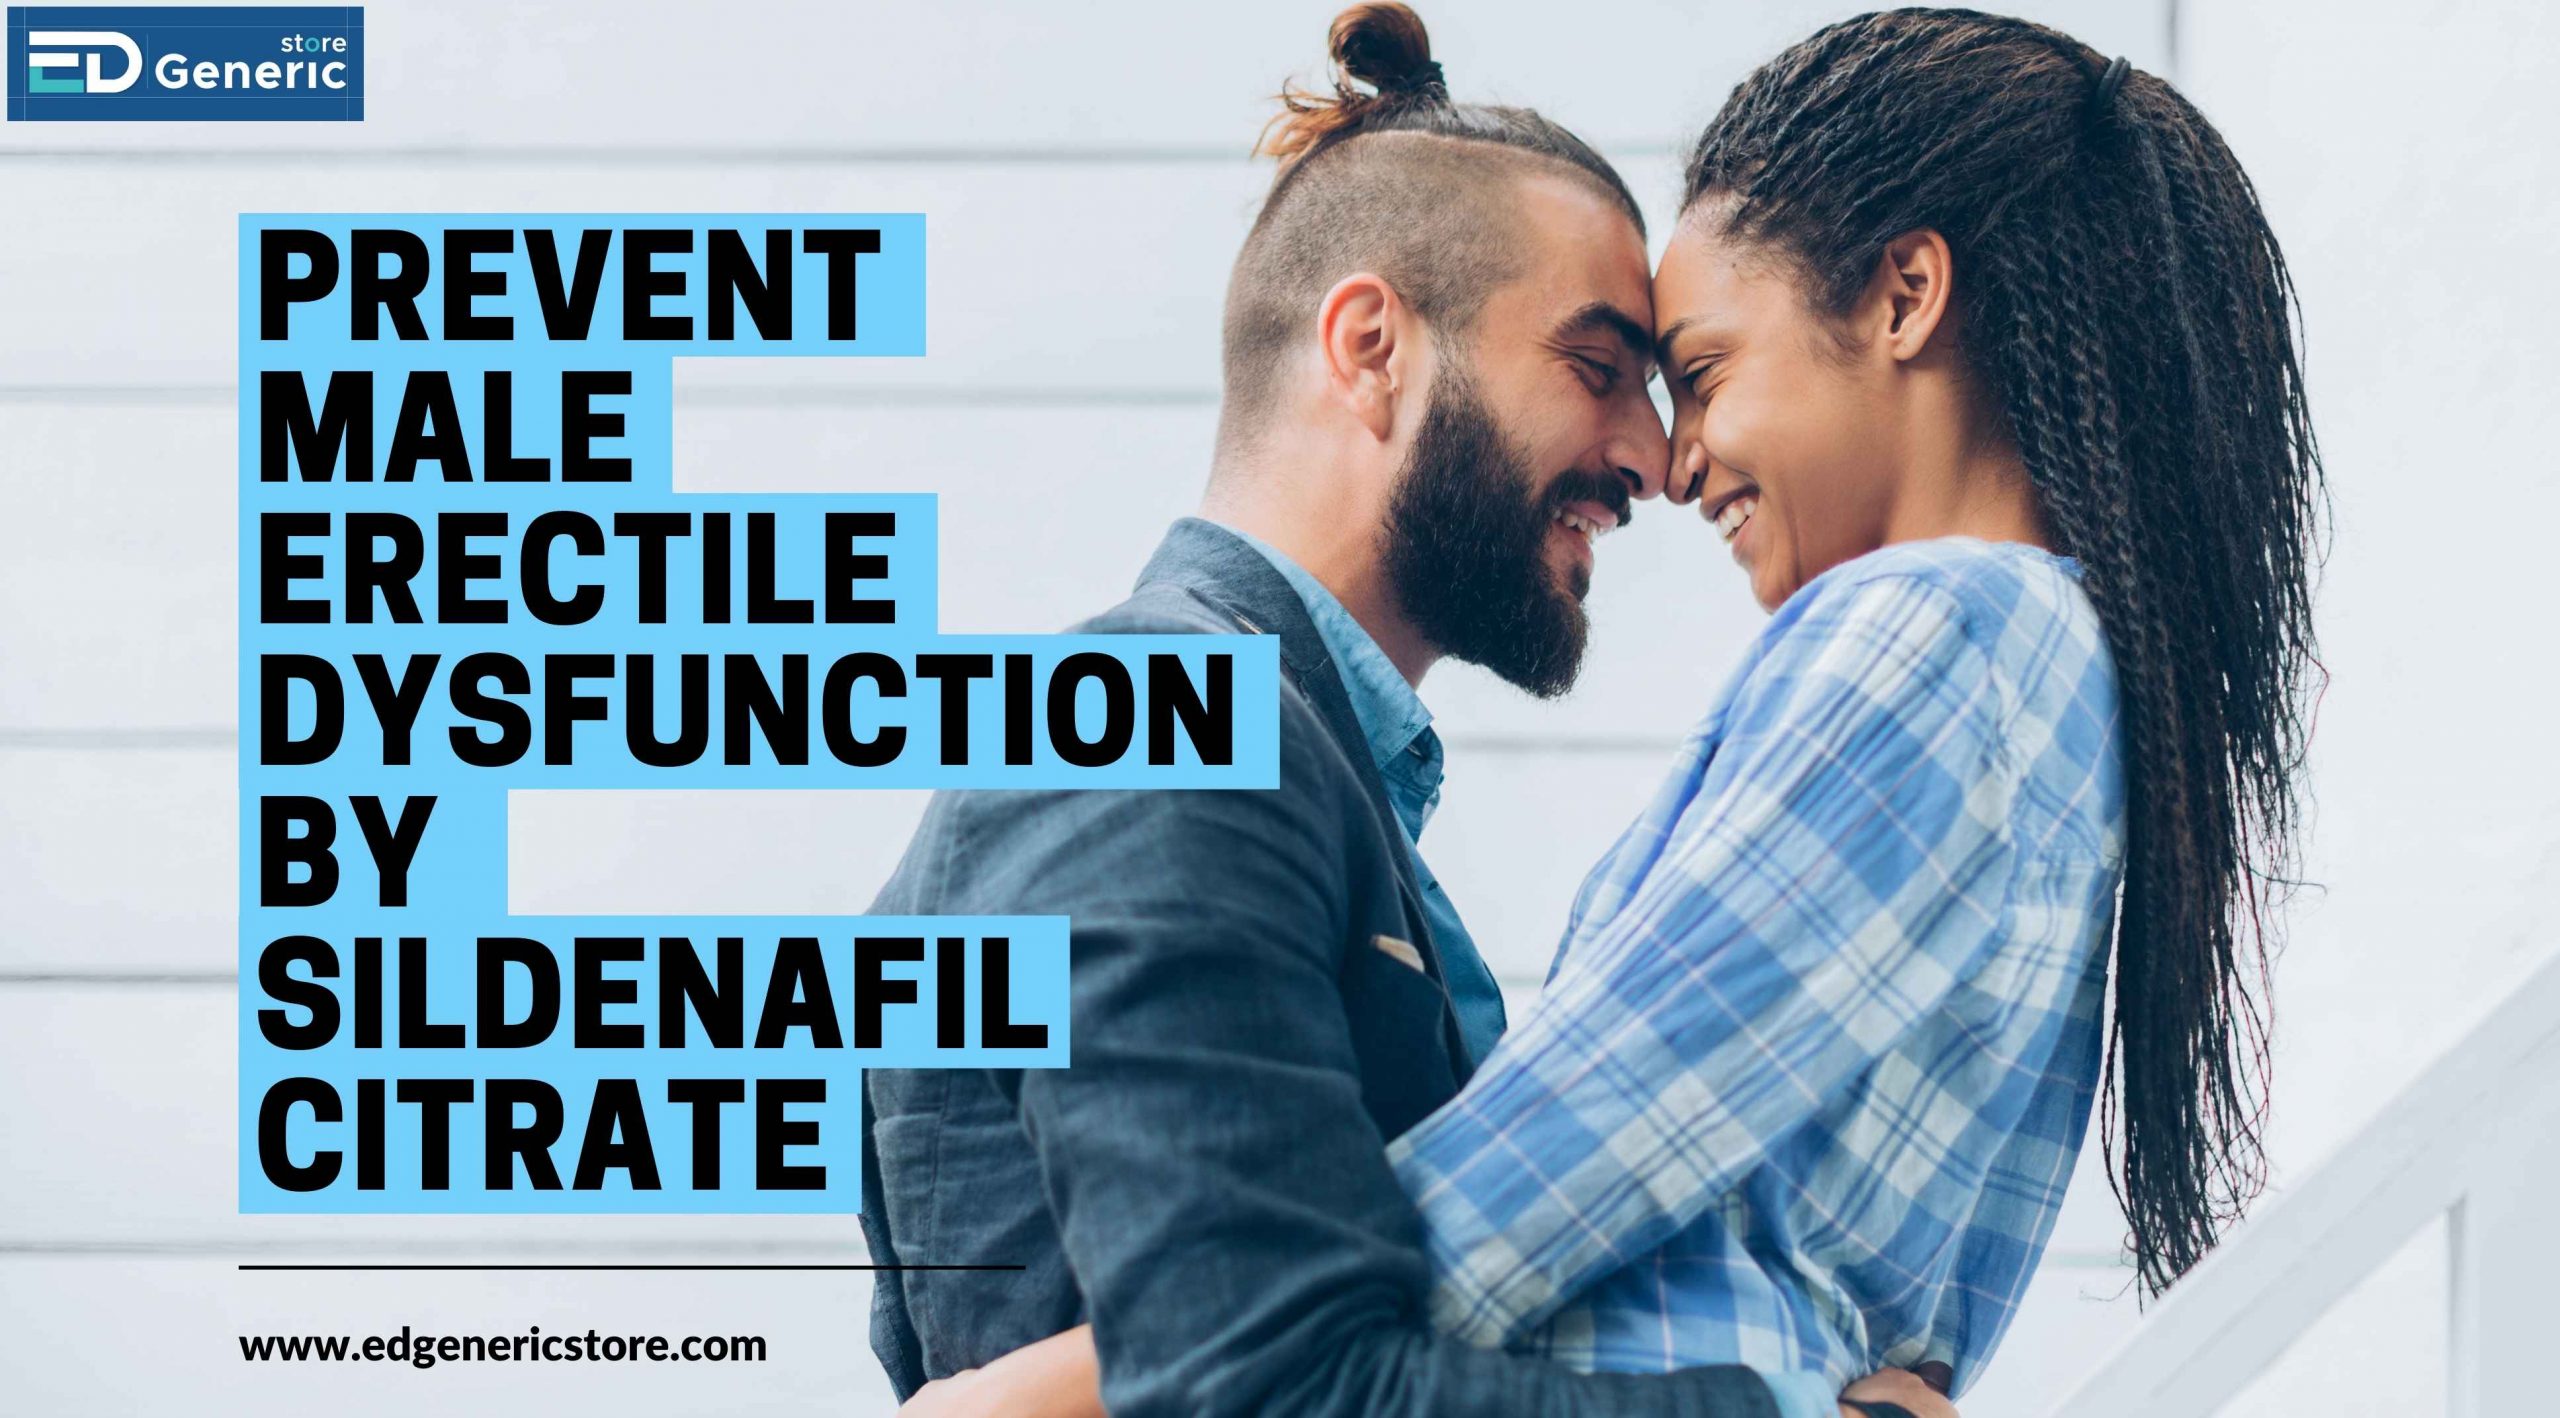 Prevent Male Erectile Dysfunction by Sildenafil Citrate